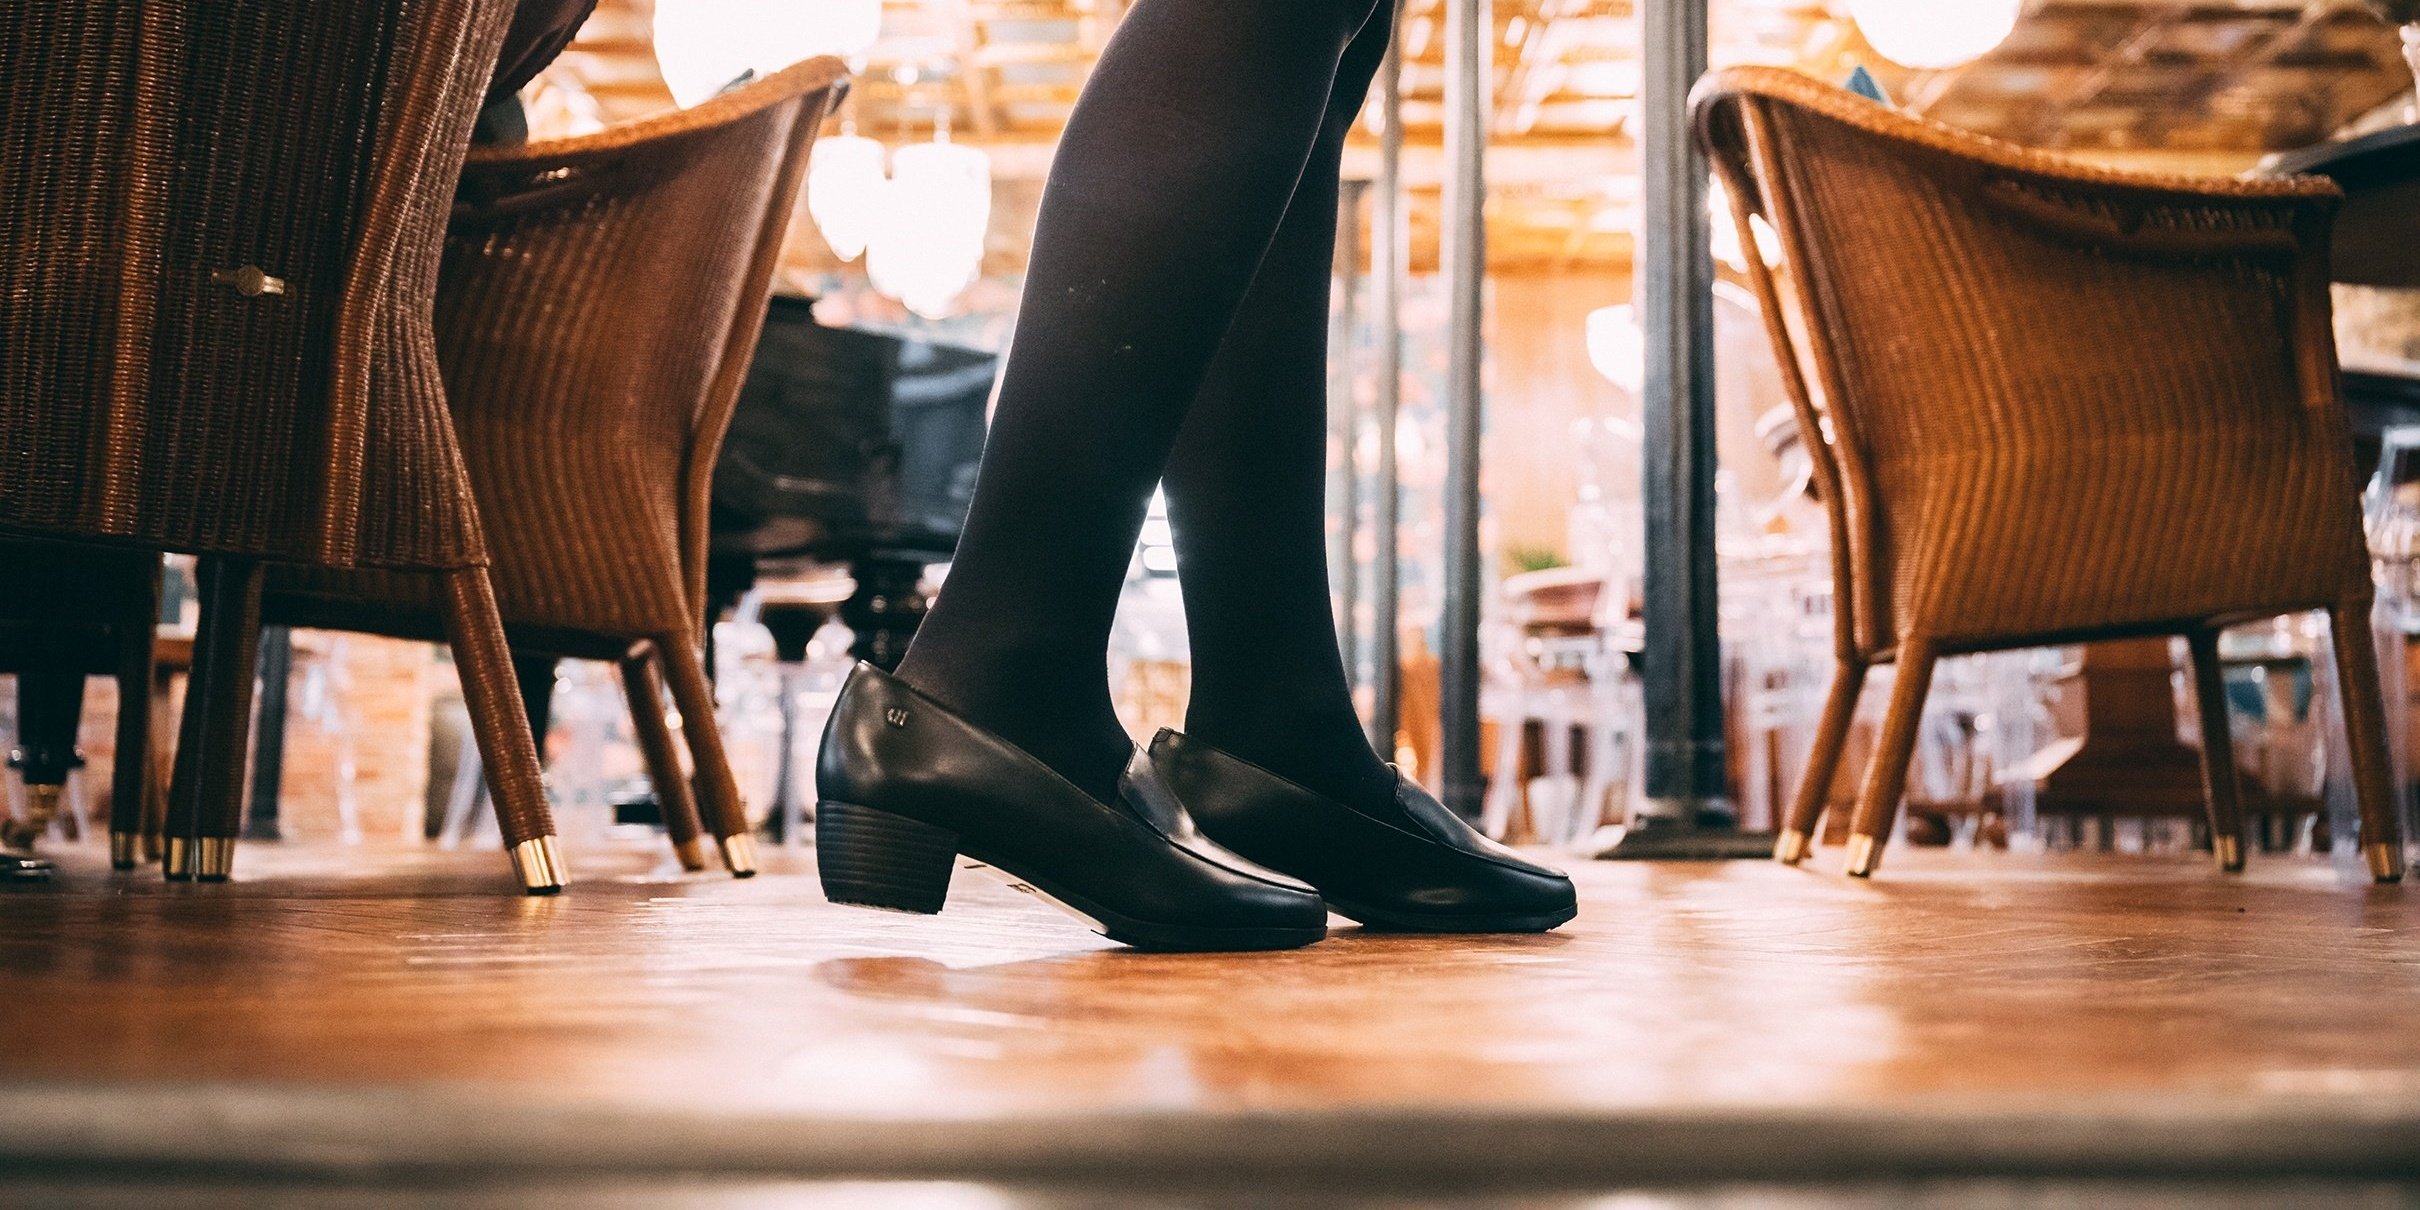 List of 6 Best Shoes For Waitressing In 2022